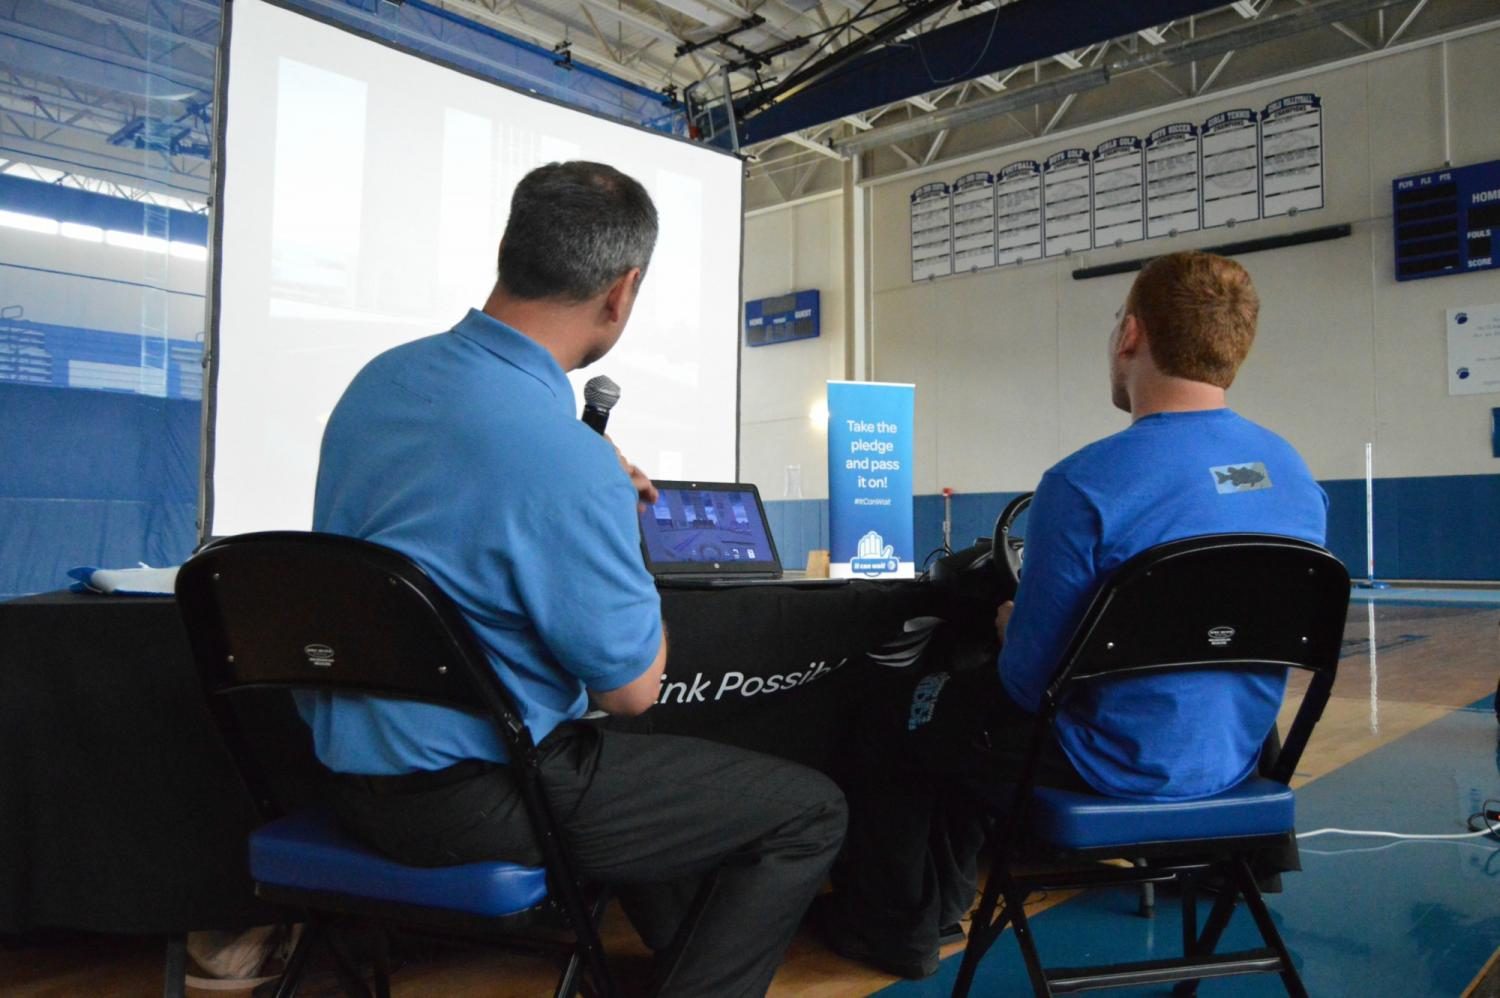 The school partnered with AT&T and their it can wait campaign for the prom assembly. AT&T provided a distracted driving simulation the difficulty and danger of distracted driving. 